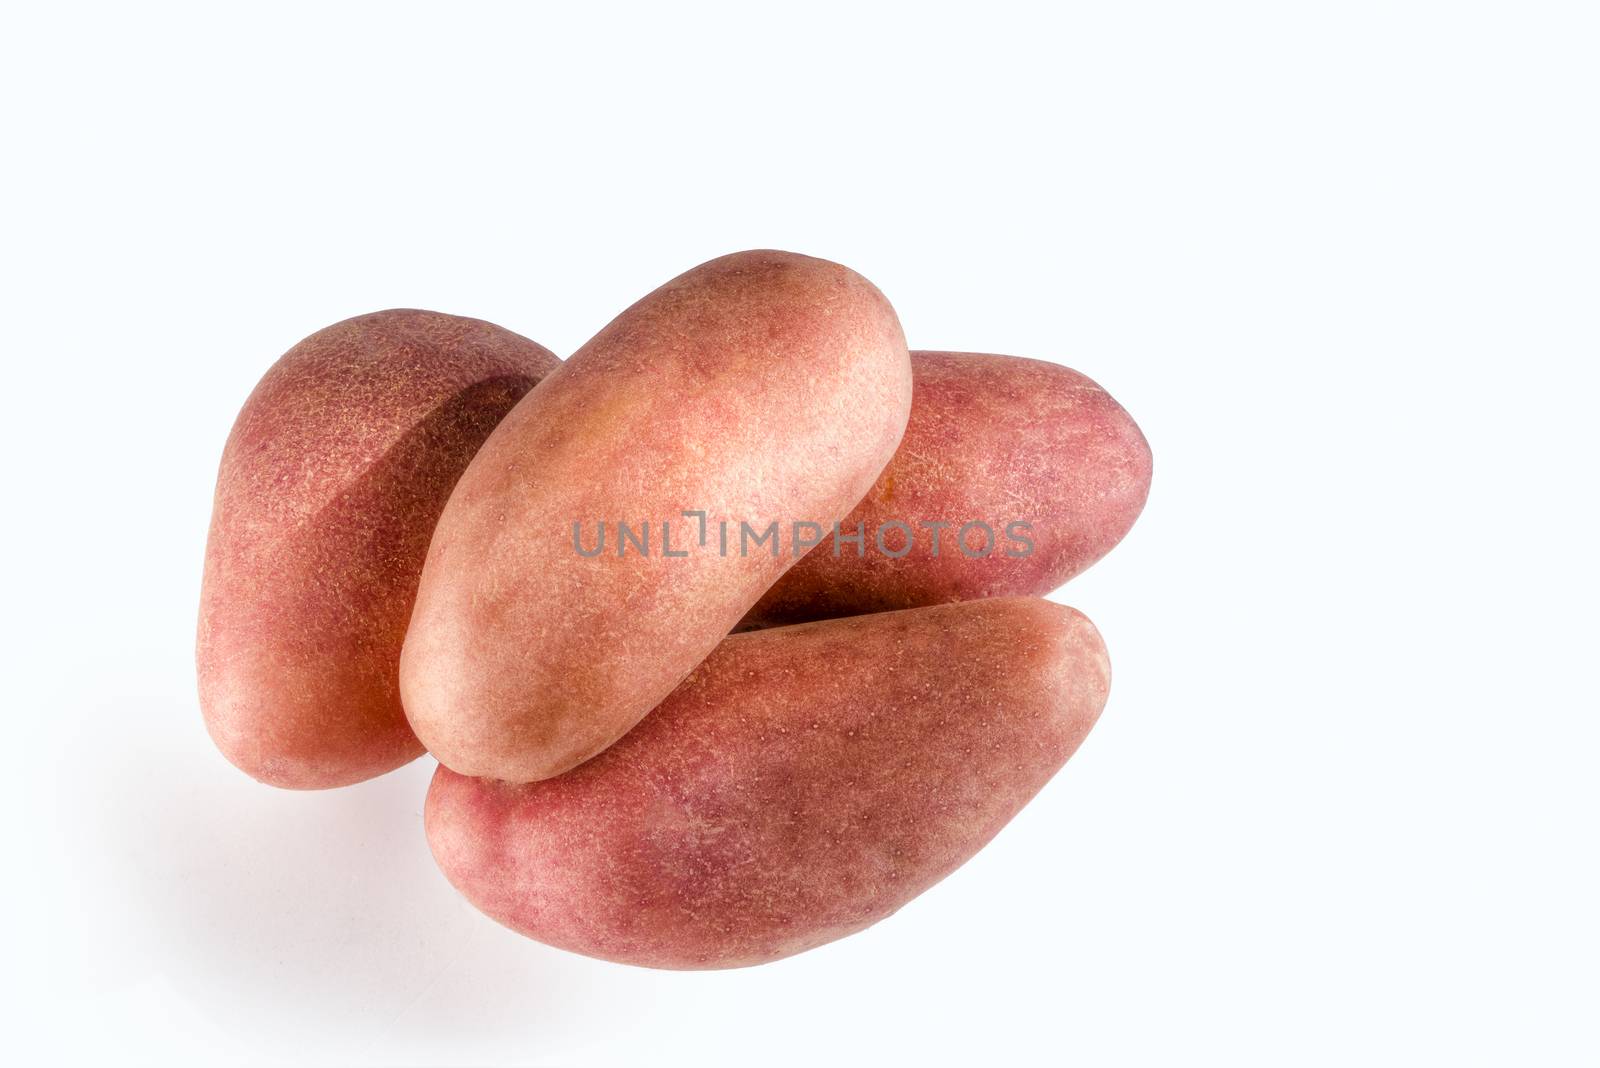 Four large red potatoes are heaped against a white background